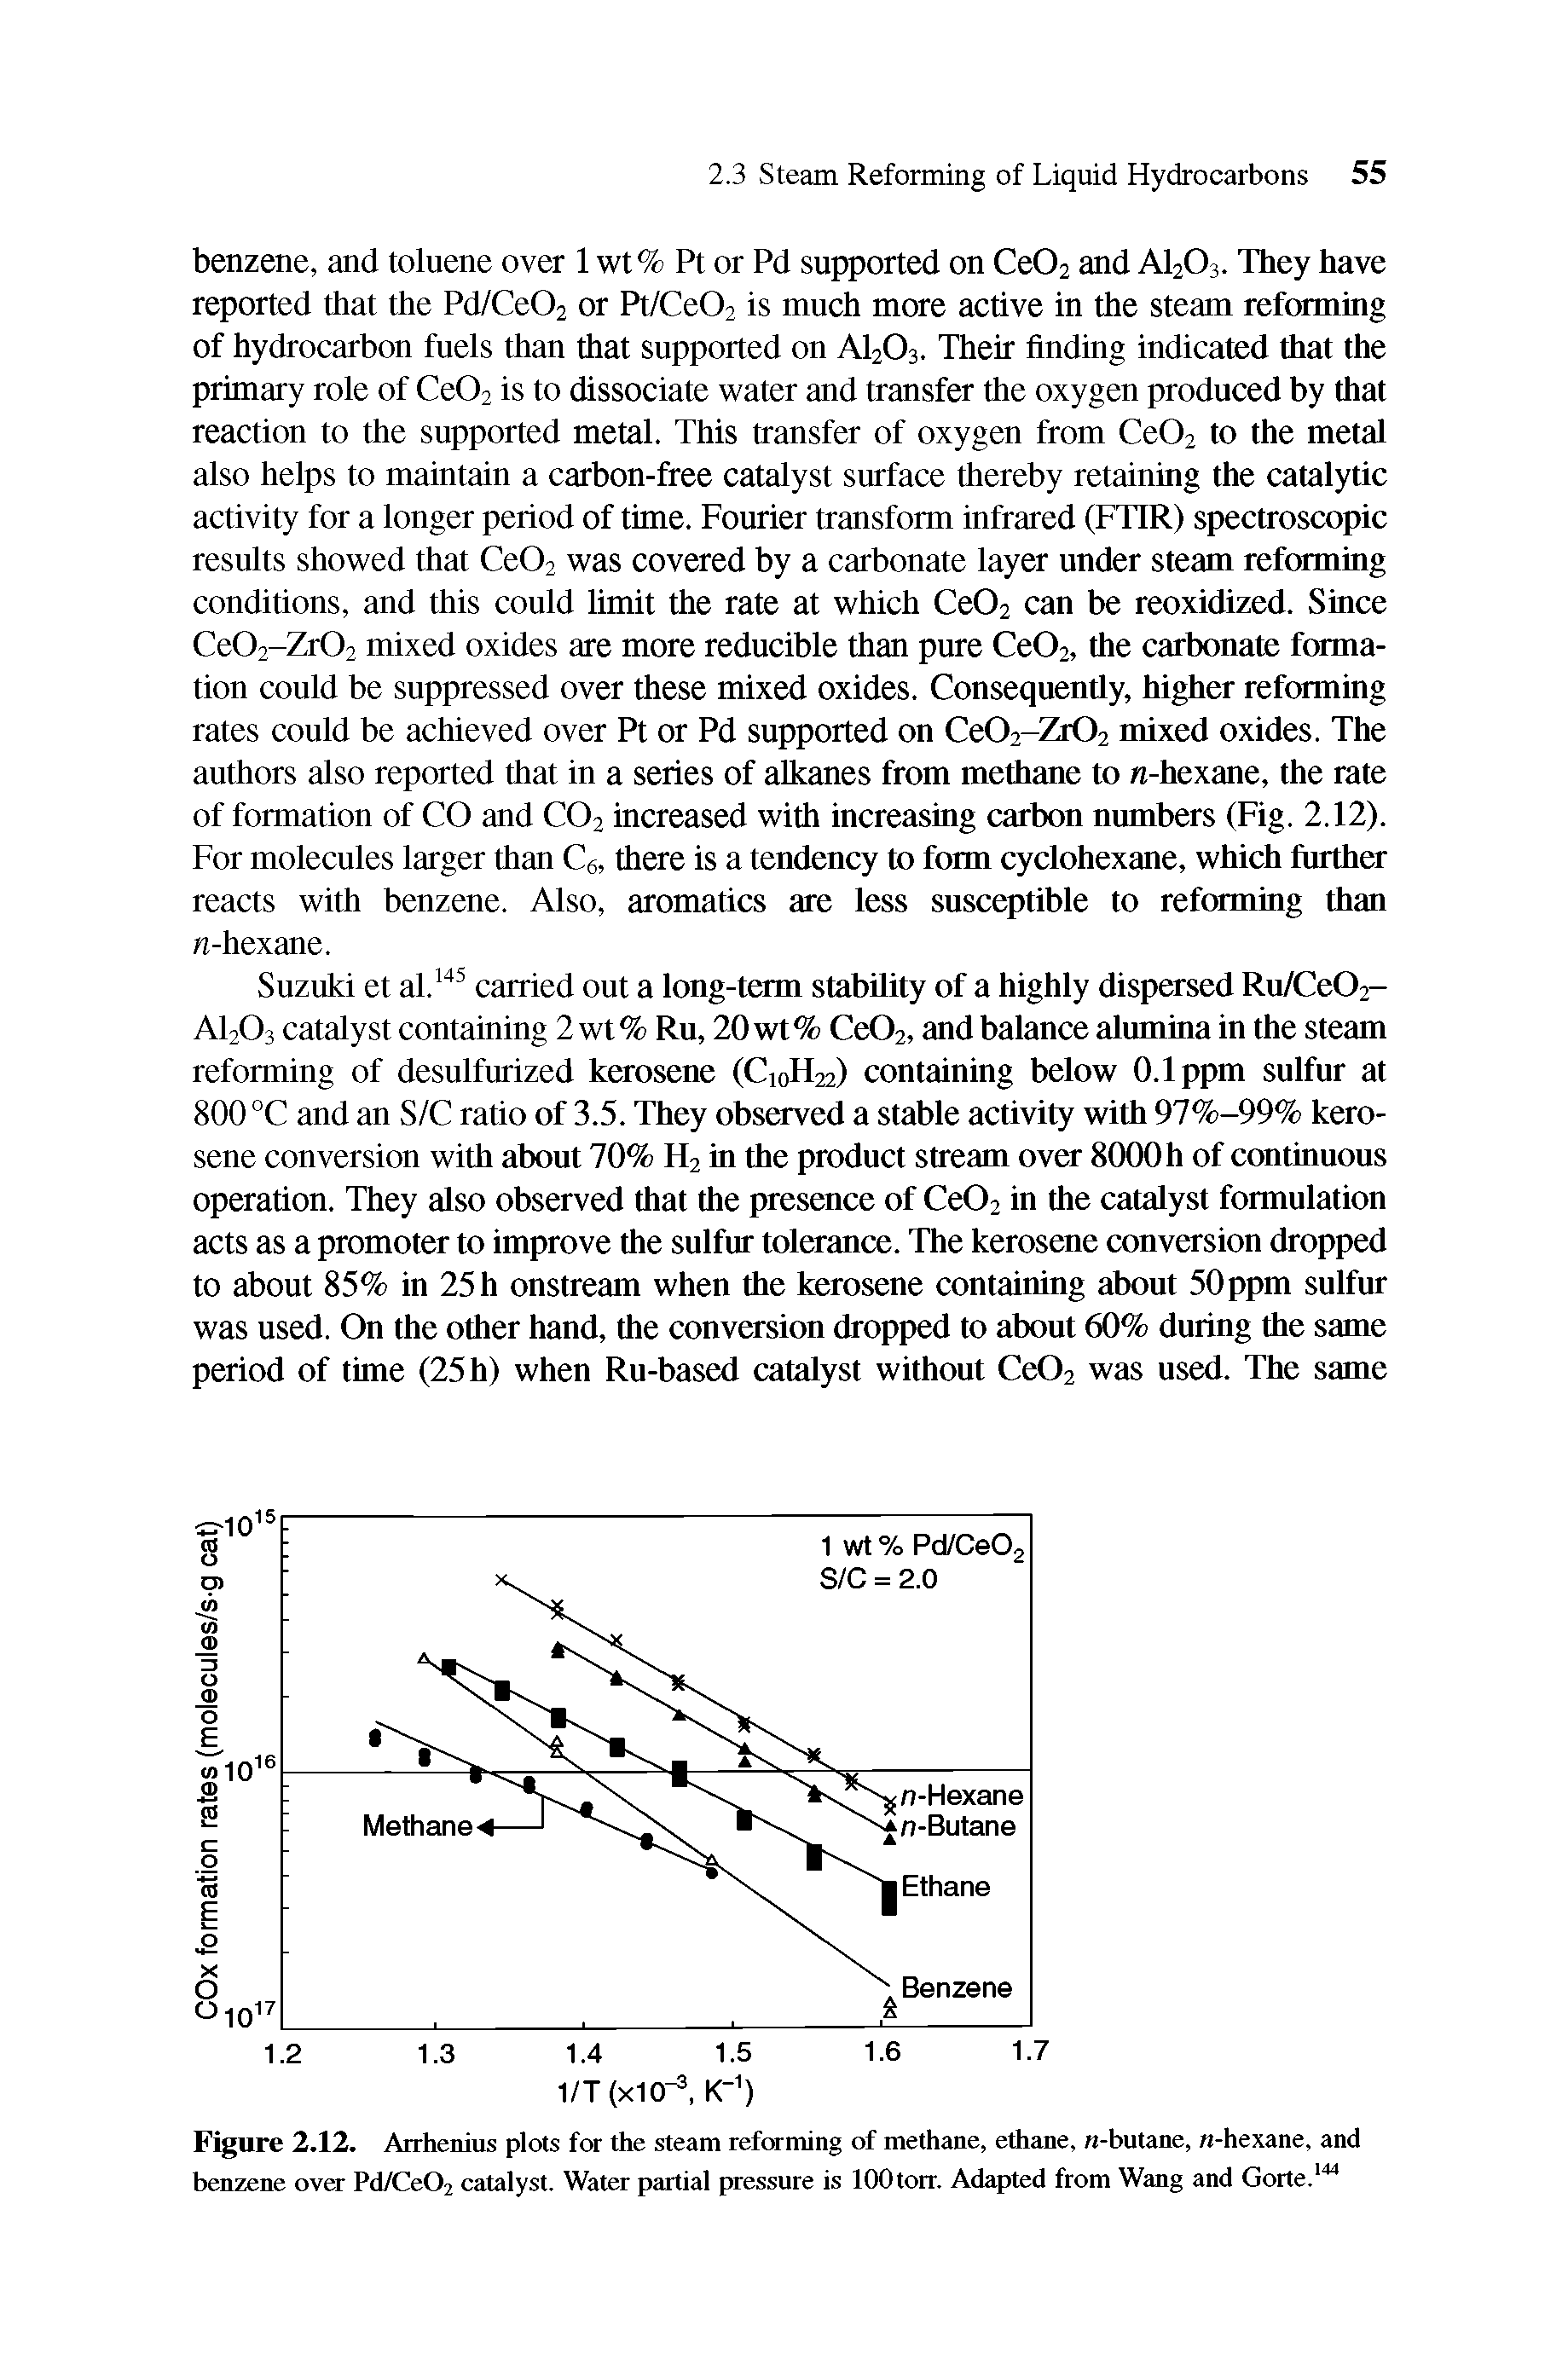 Figure 2.12. Arrhenius plots for the steam reforming of methane, ethane, n-butane, /t-hexane, and benzene over Pd/Ce02 catalyst. Water partial pressure is lOOtorr. Adapted from Wang and Gorte.144...